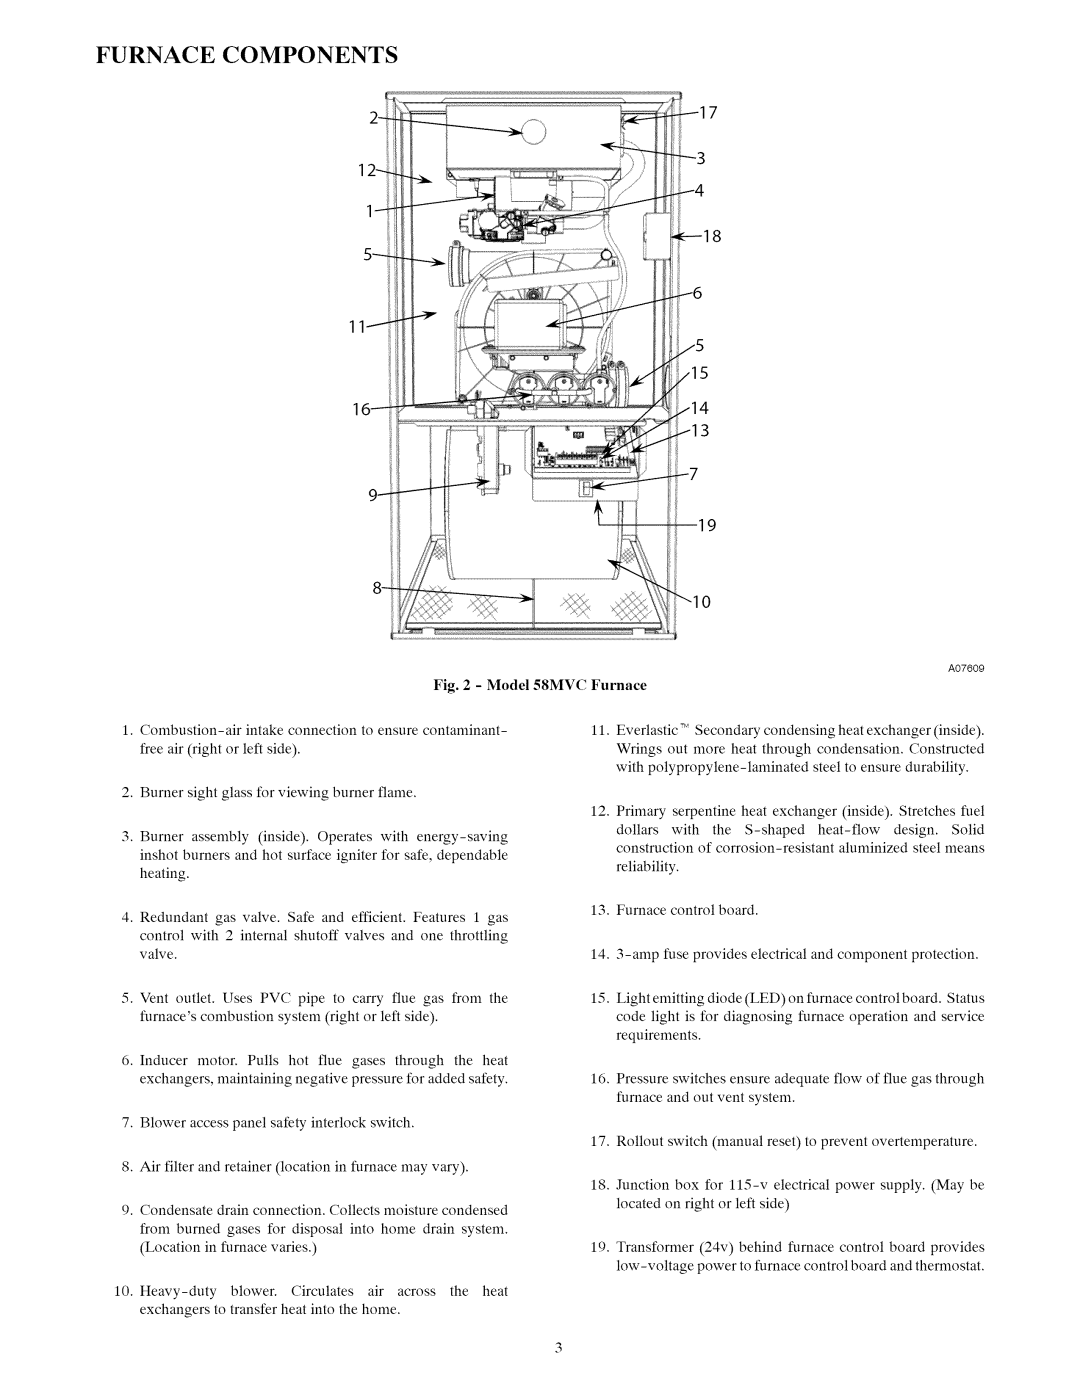 Carrier owner manual Furnace Components, Model 58MVC Furnace 